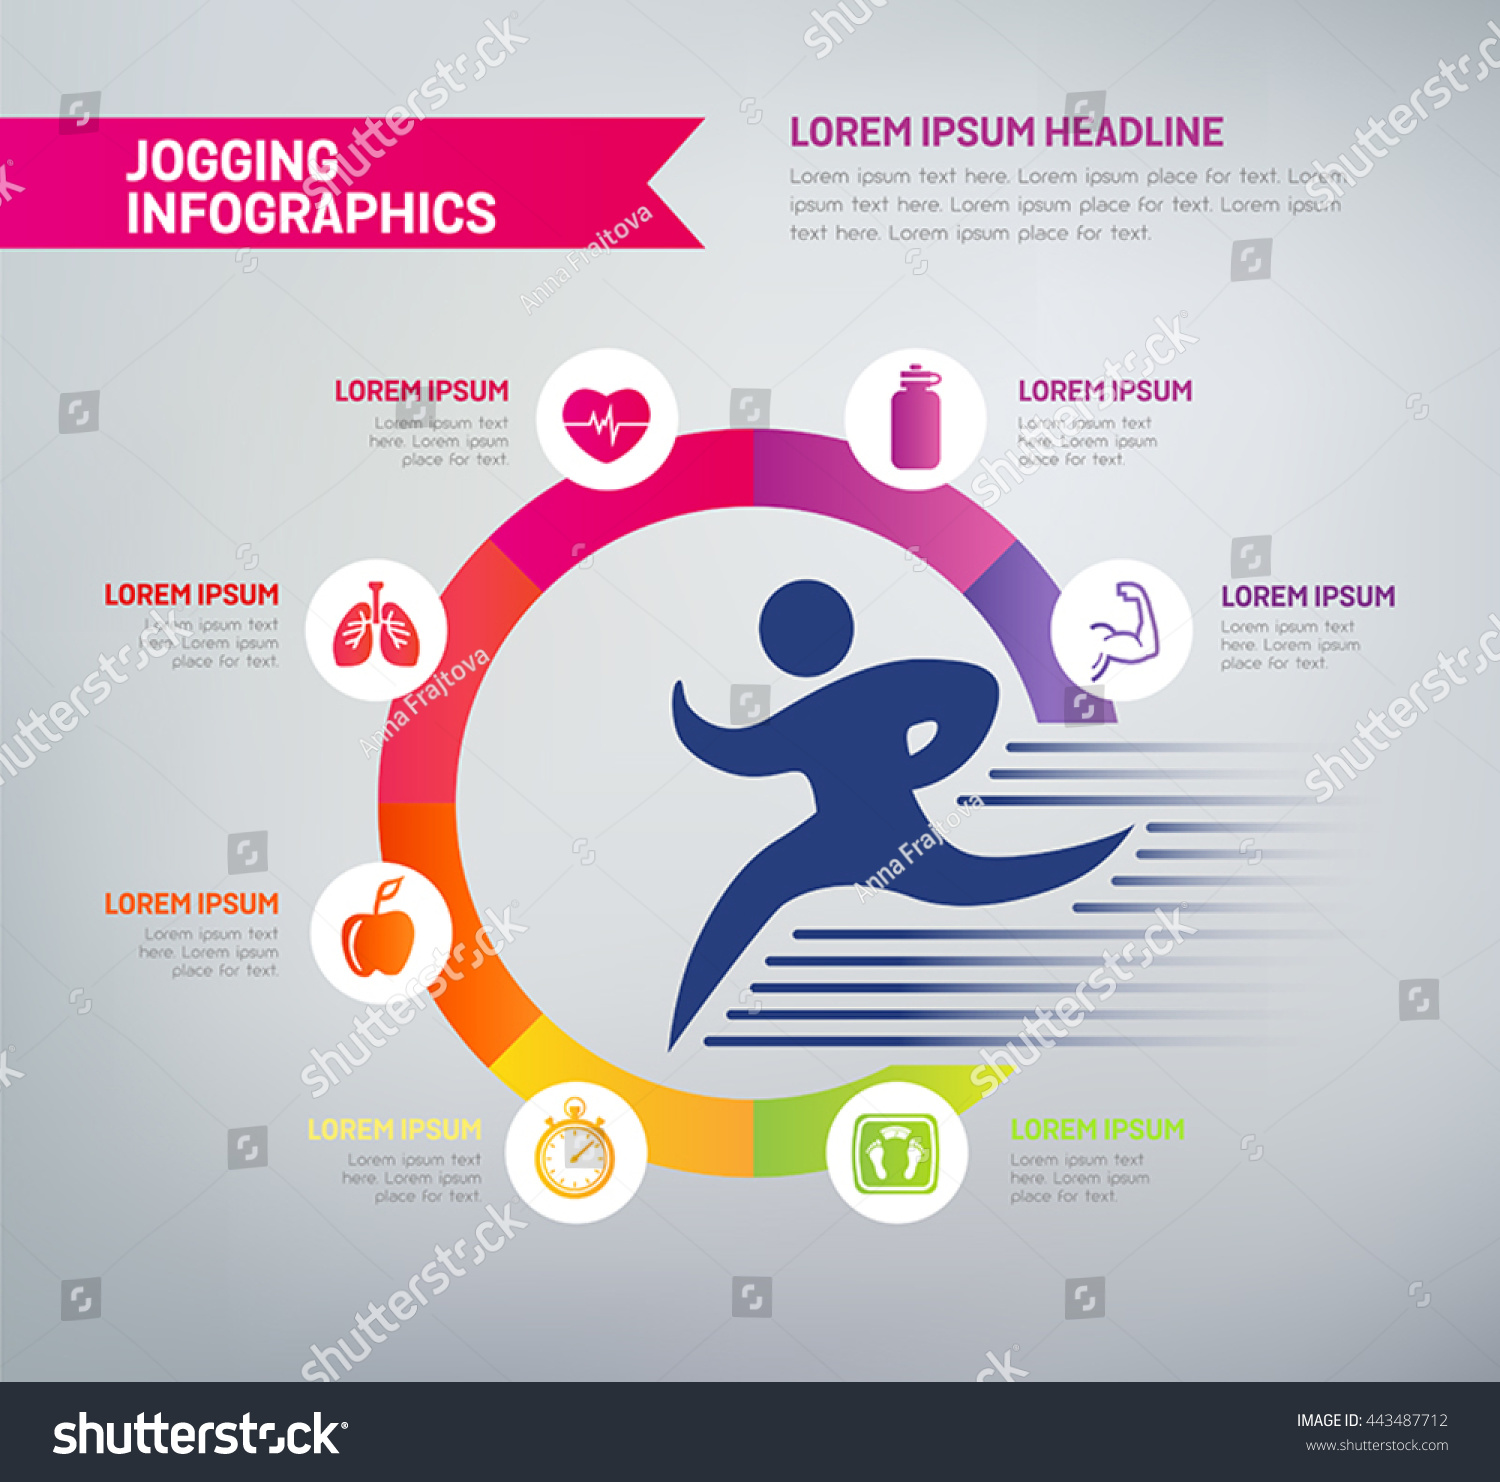 SVG of Jogging infographics with icons - benefits of jogging in a diagram. Health improvements, muscle strength, mental health, weight loss. svg